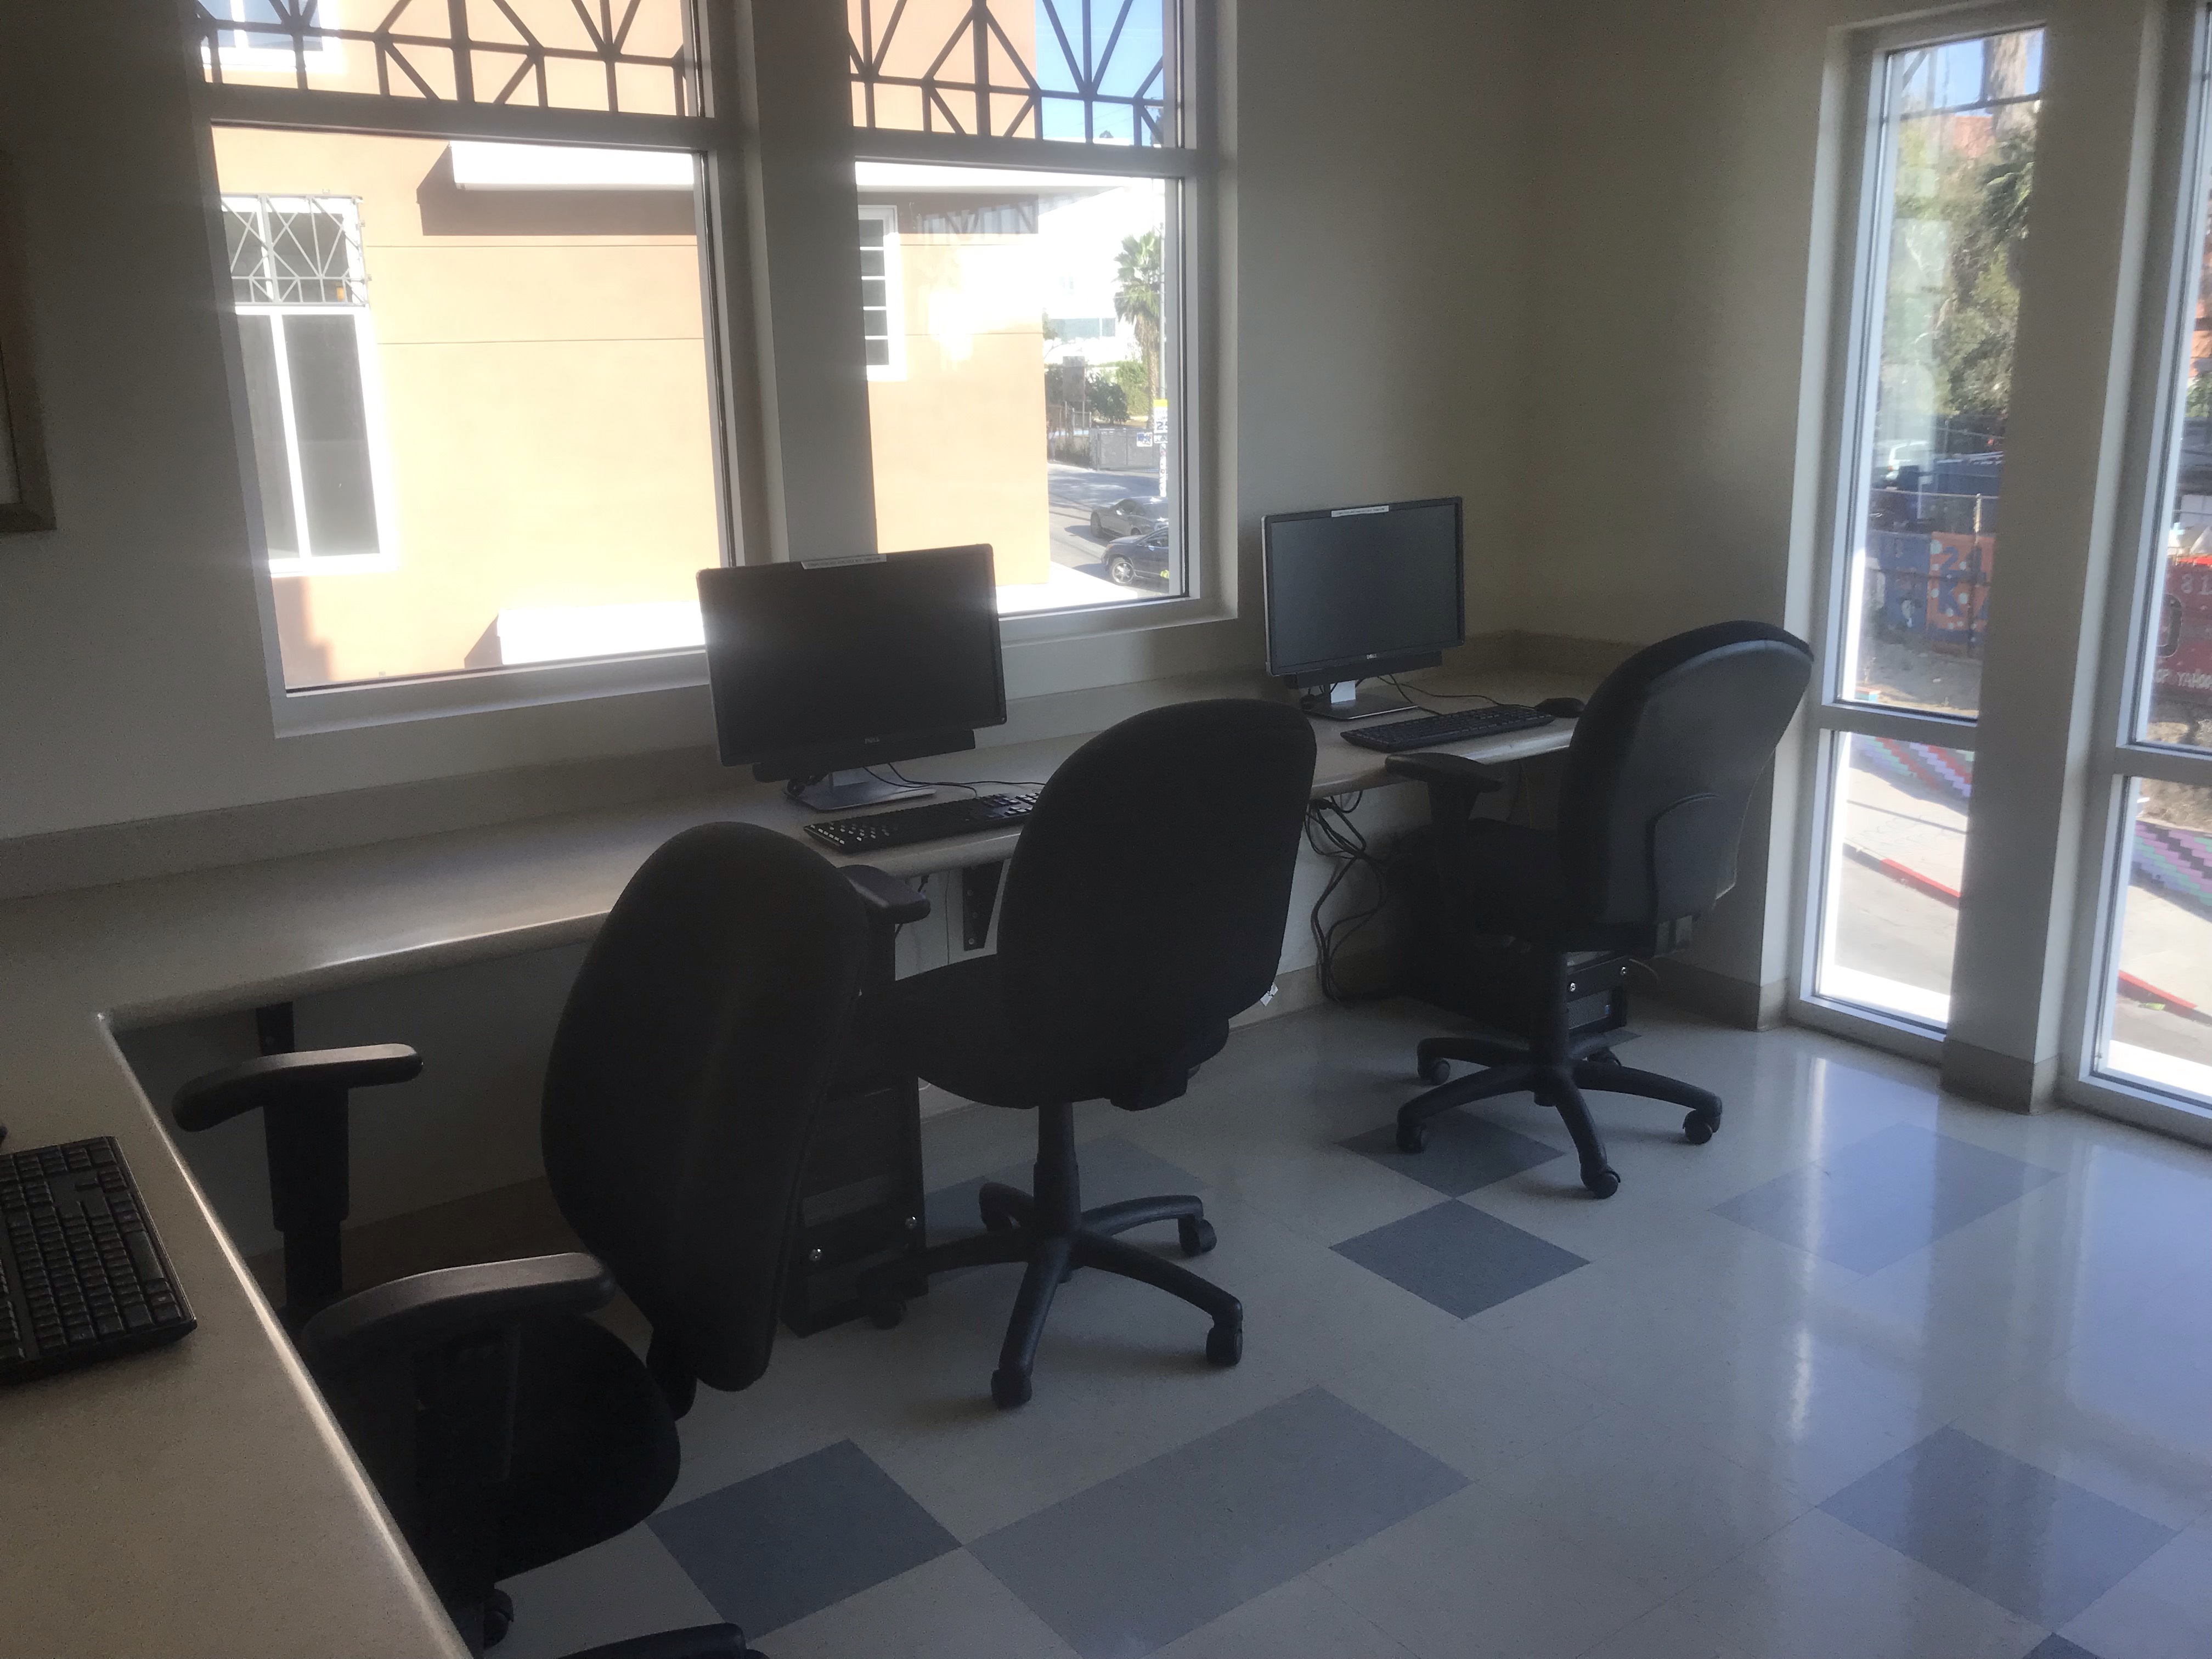 View of a office workstation, three computers, three desk chairs, gray tile flooring, two windows.